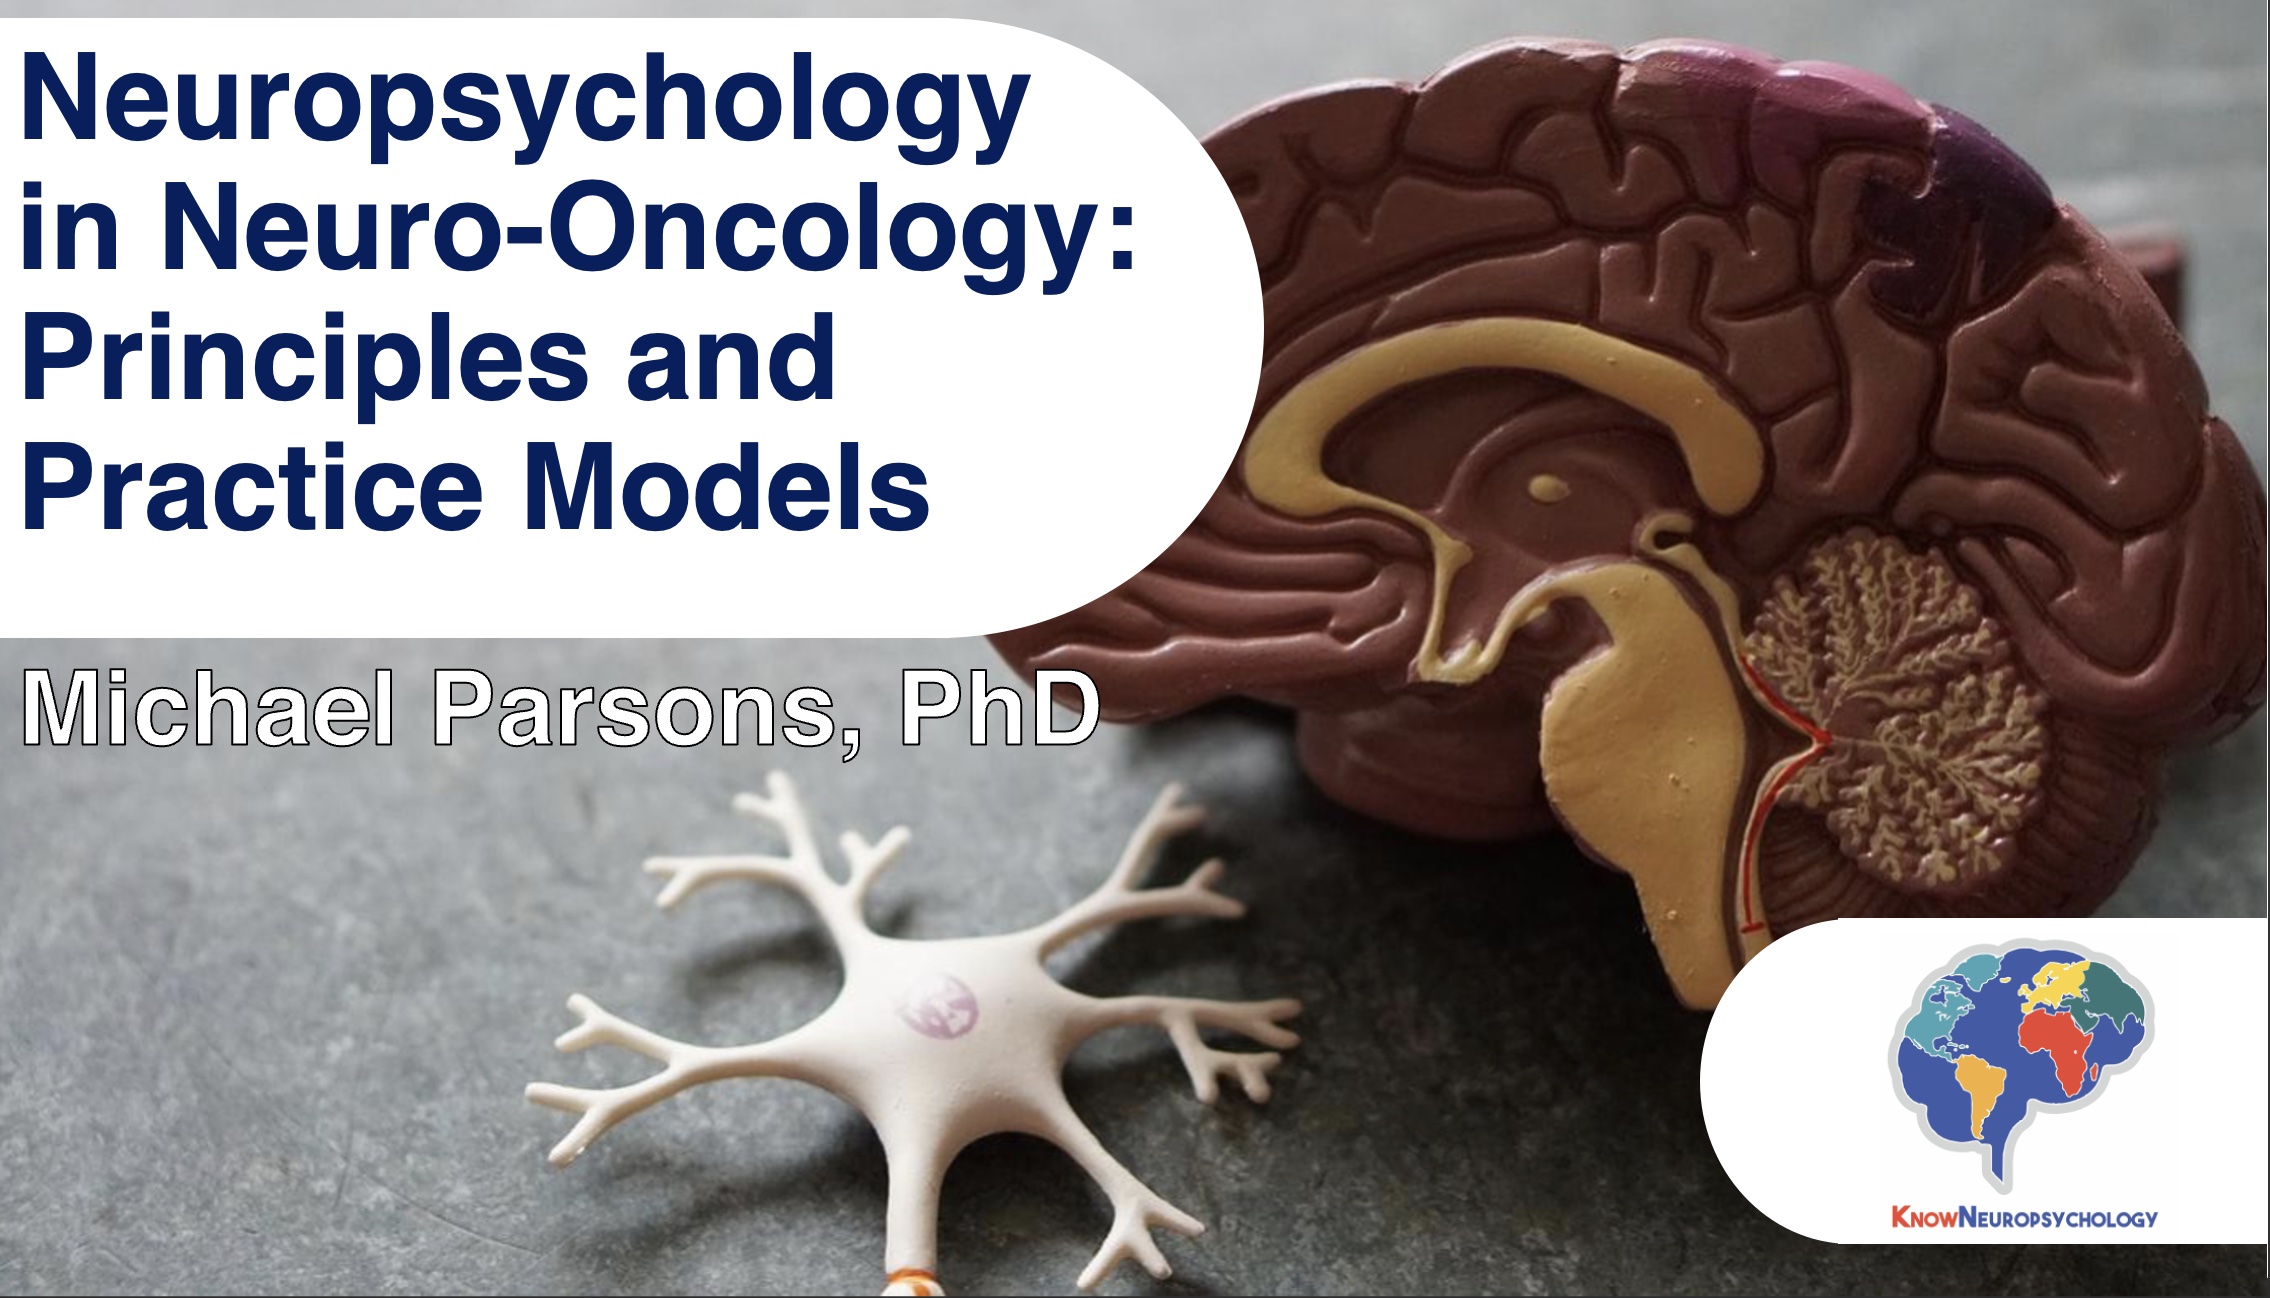 Neuropsychology in Neuro-oncology: An introduction to basic principles and practice models with Dr. Michael Parsons